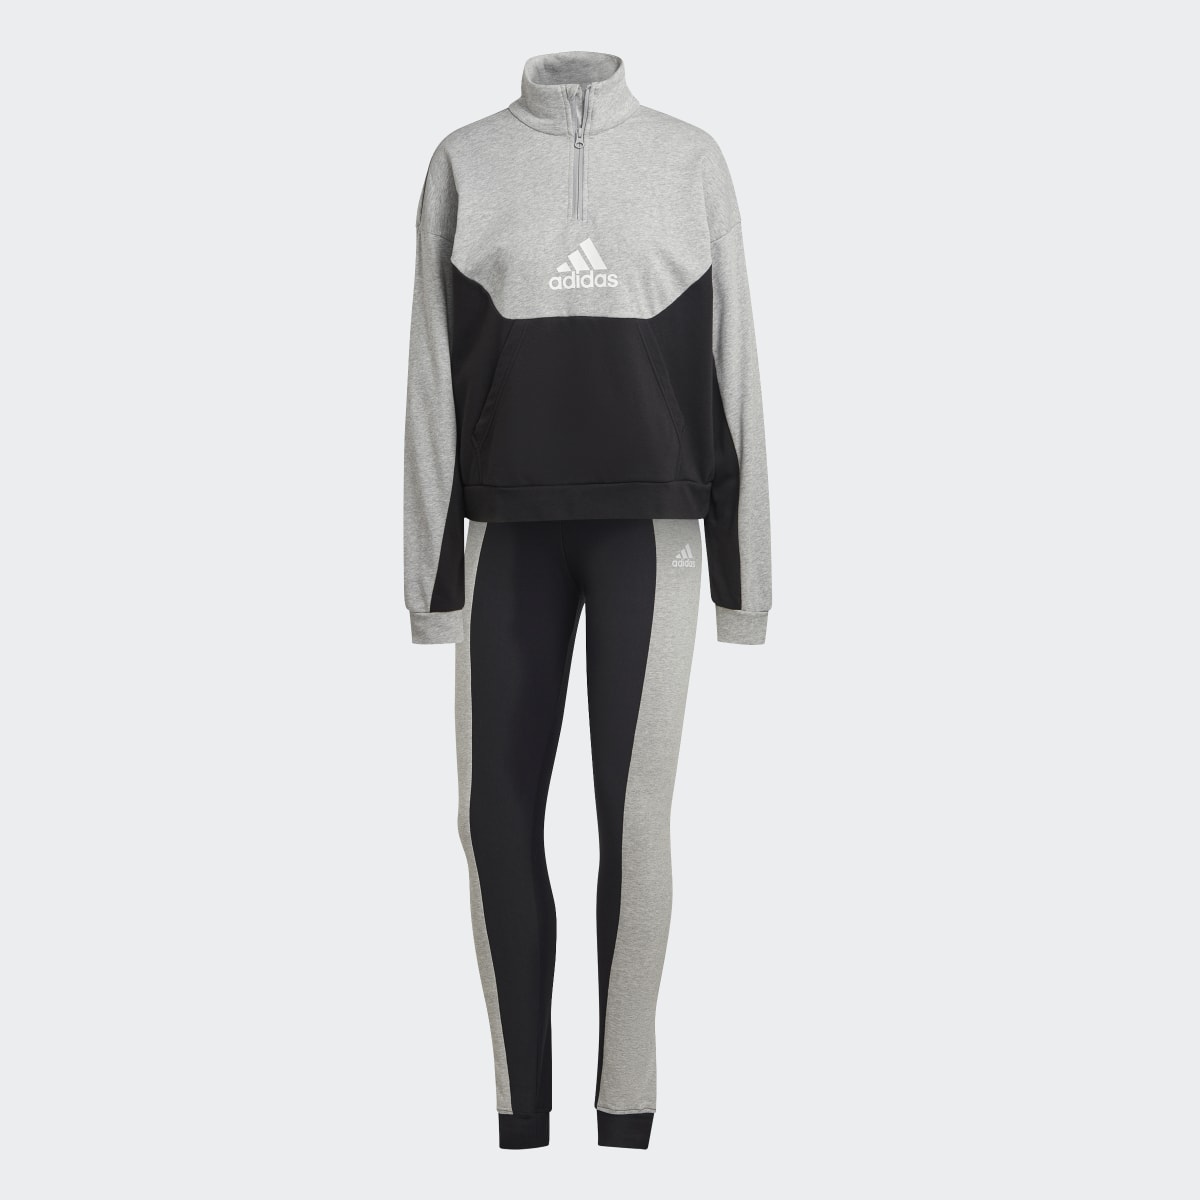 Adidas Half-Zip and Tights Tracksuit. 5